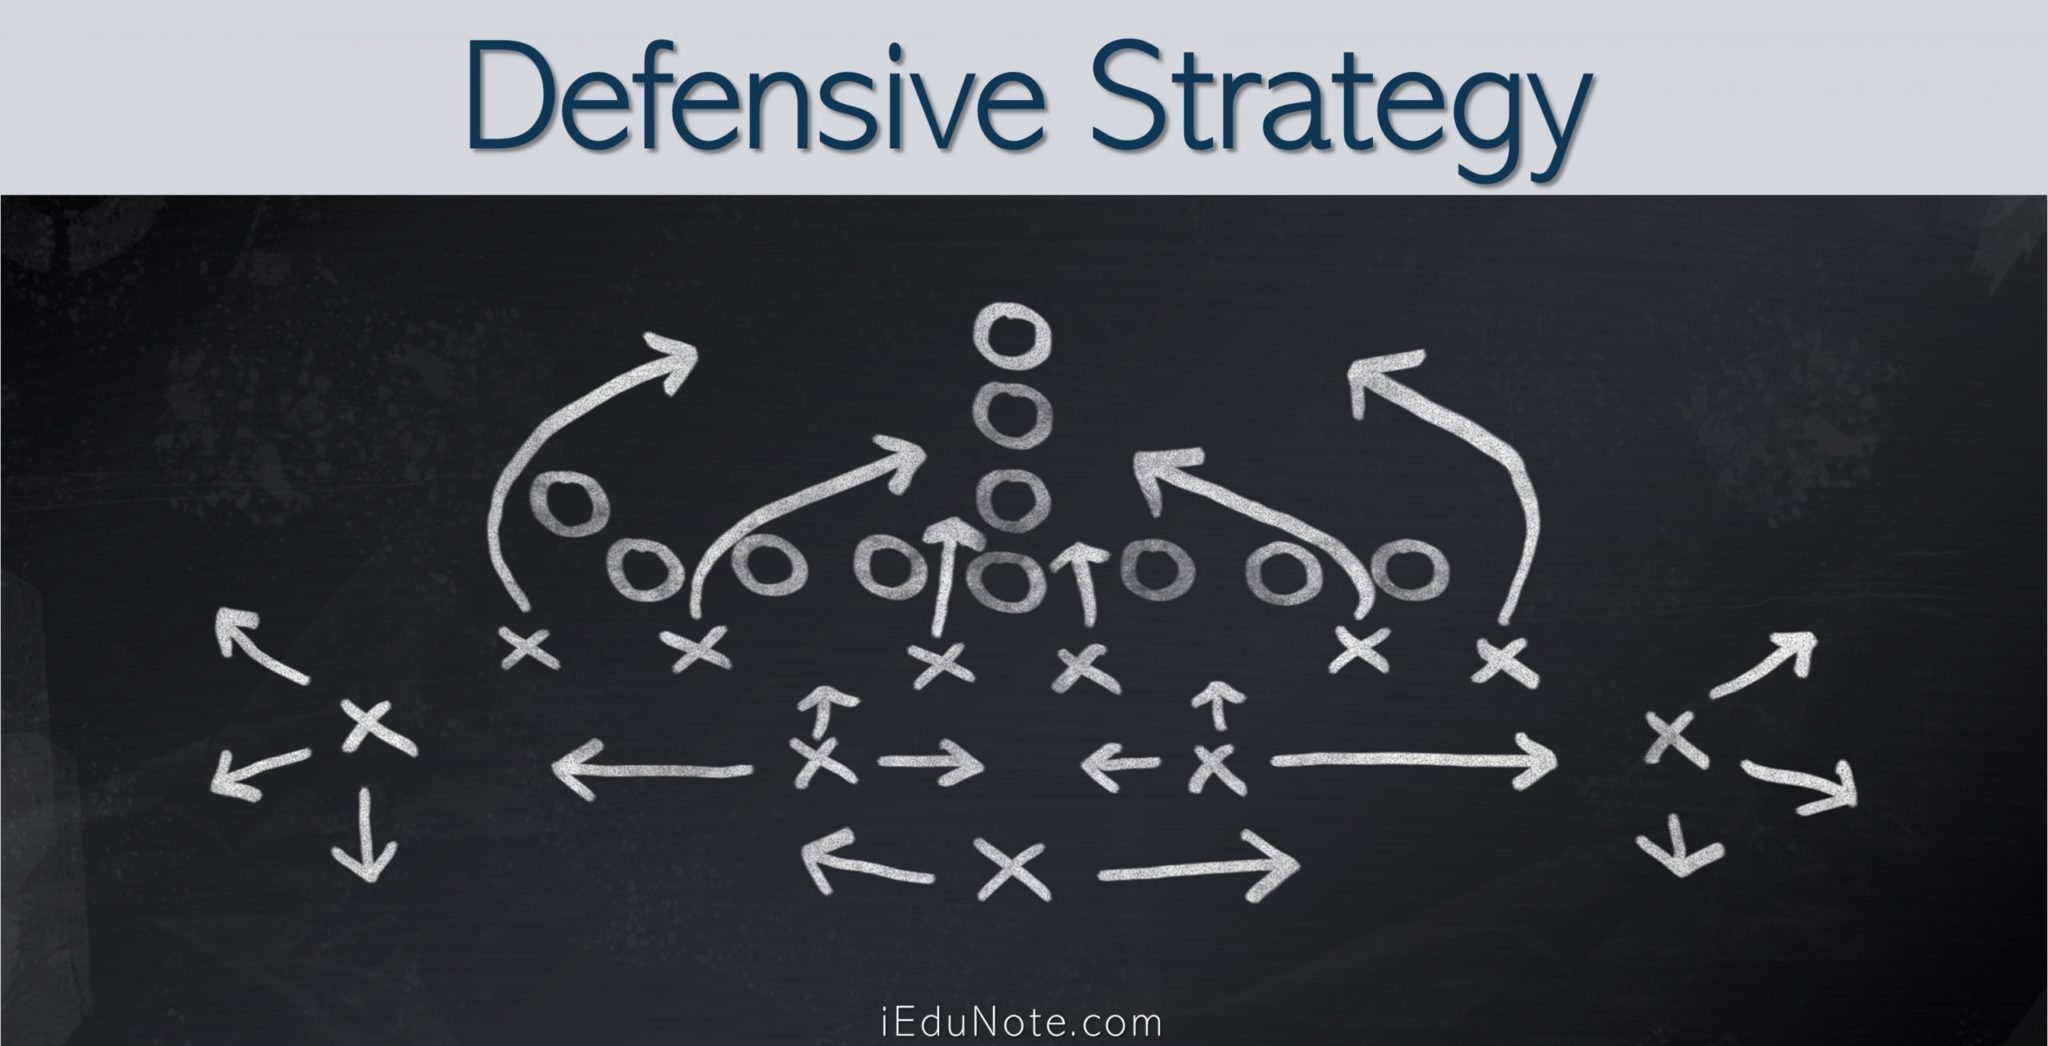 Complete Guide to Defensive Strategy - Welp Magazine